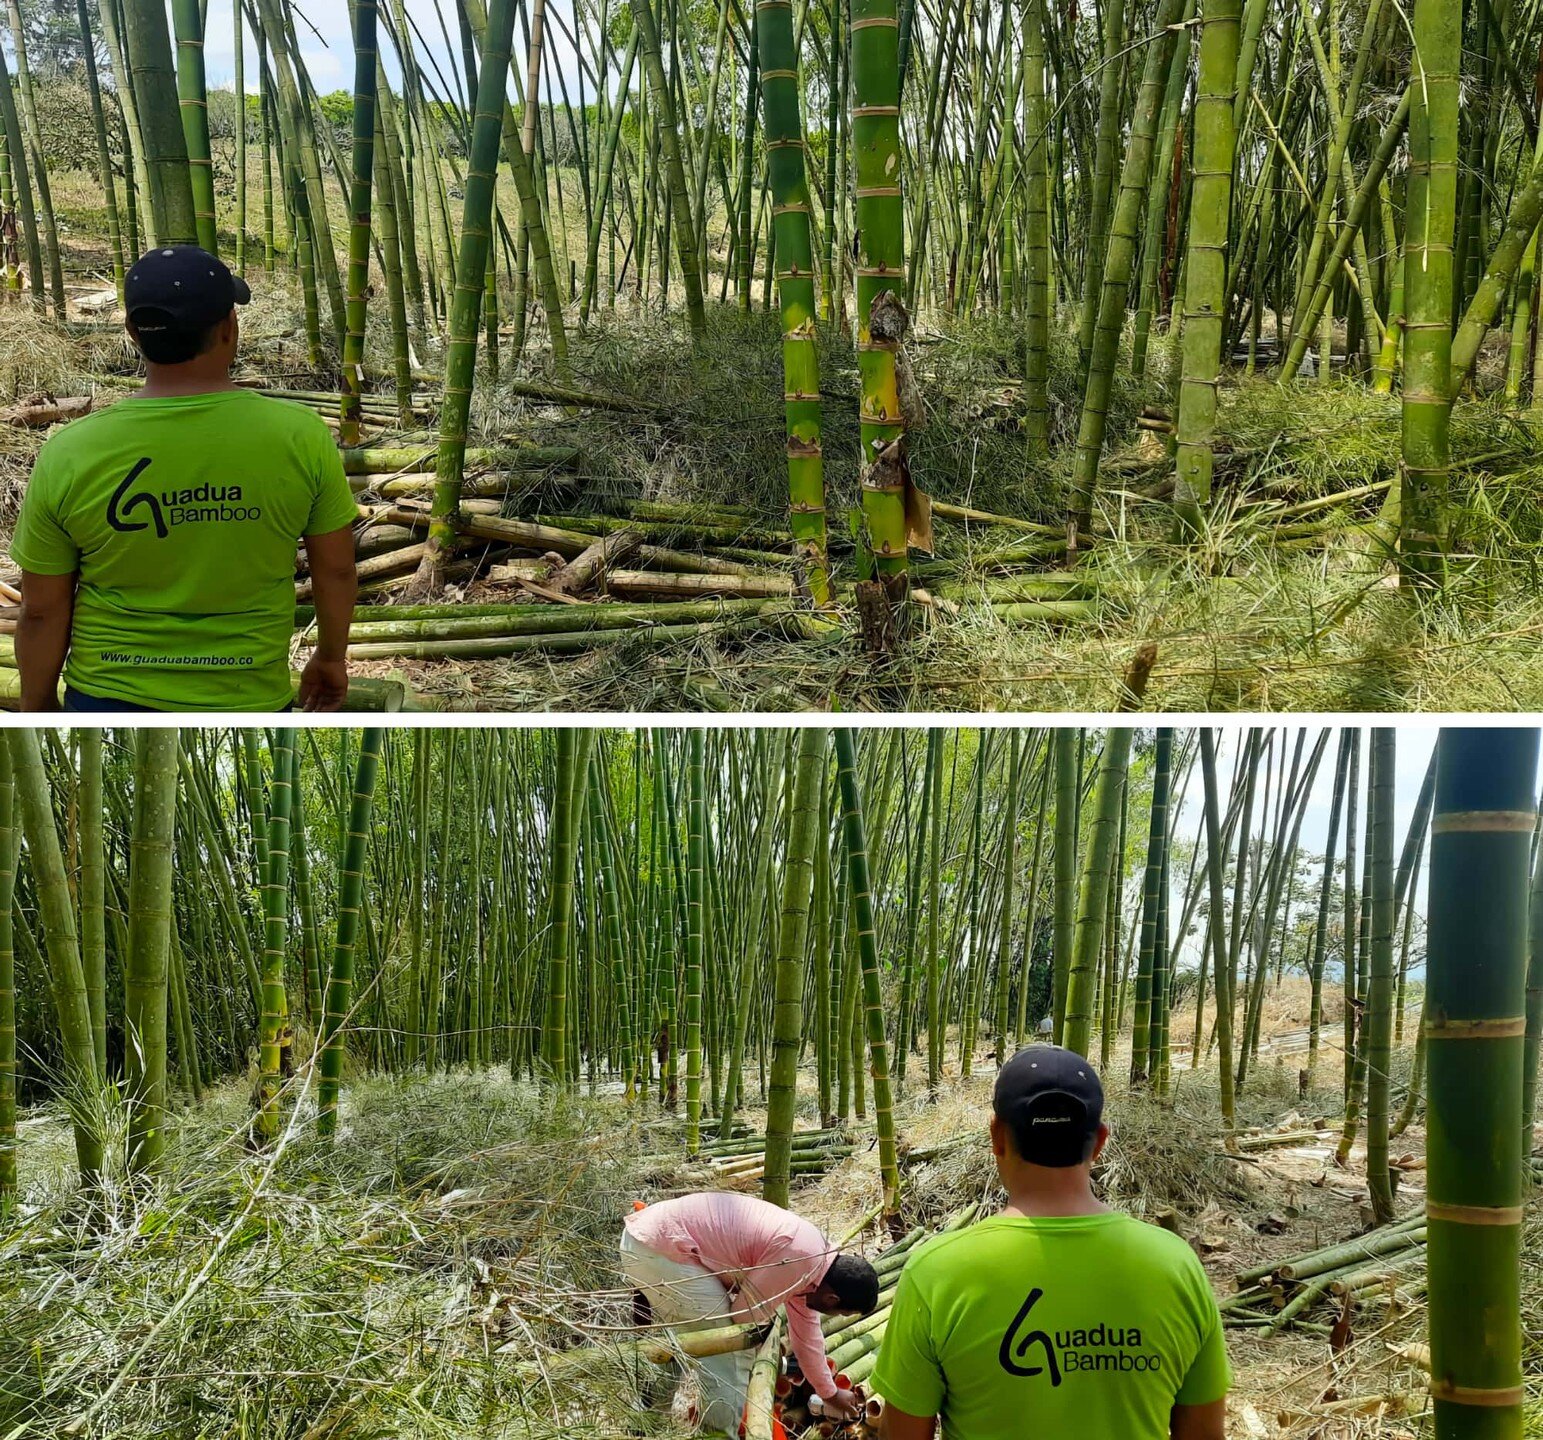 The Colombian 🇨🇴 government has established a rigorous certification system for bamboo production. This system ensures that bamboo is harvested responsibly, respecting ecological and socioeconomic principles. The certification process involves a th